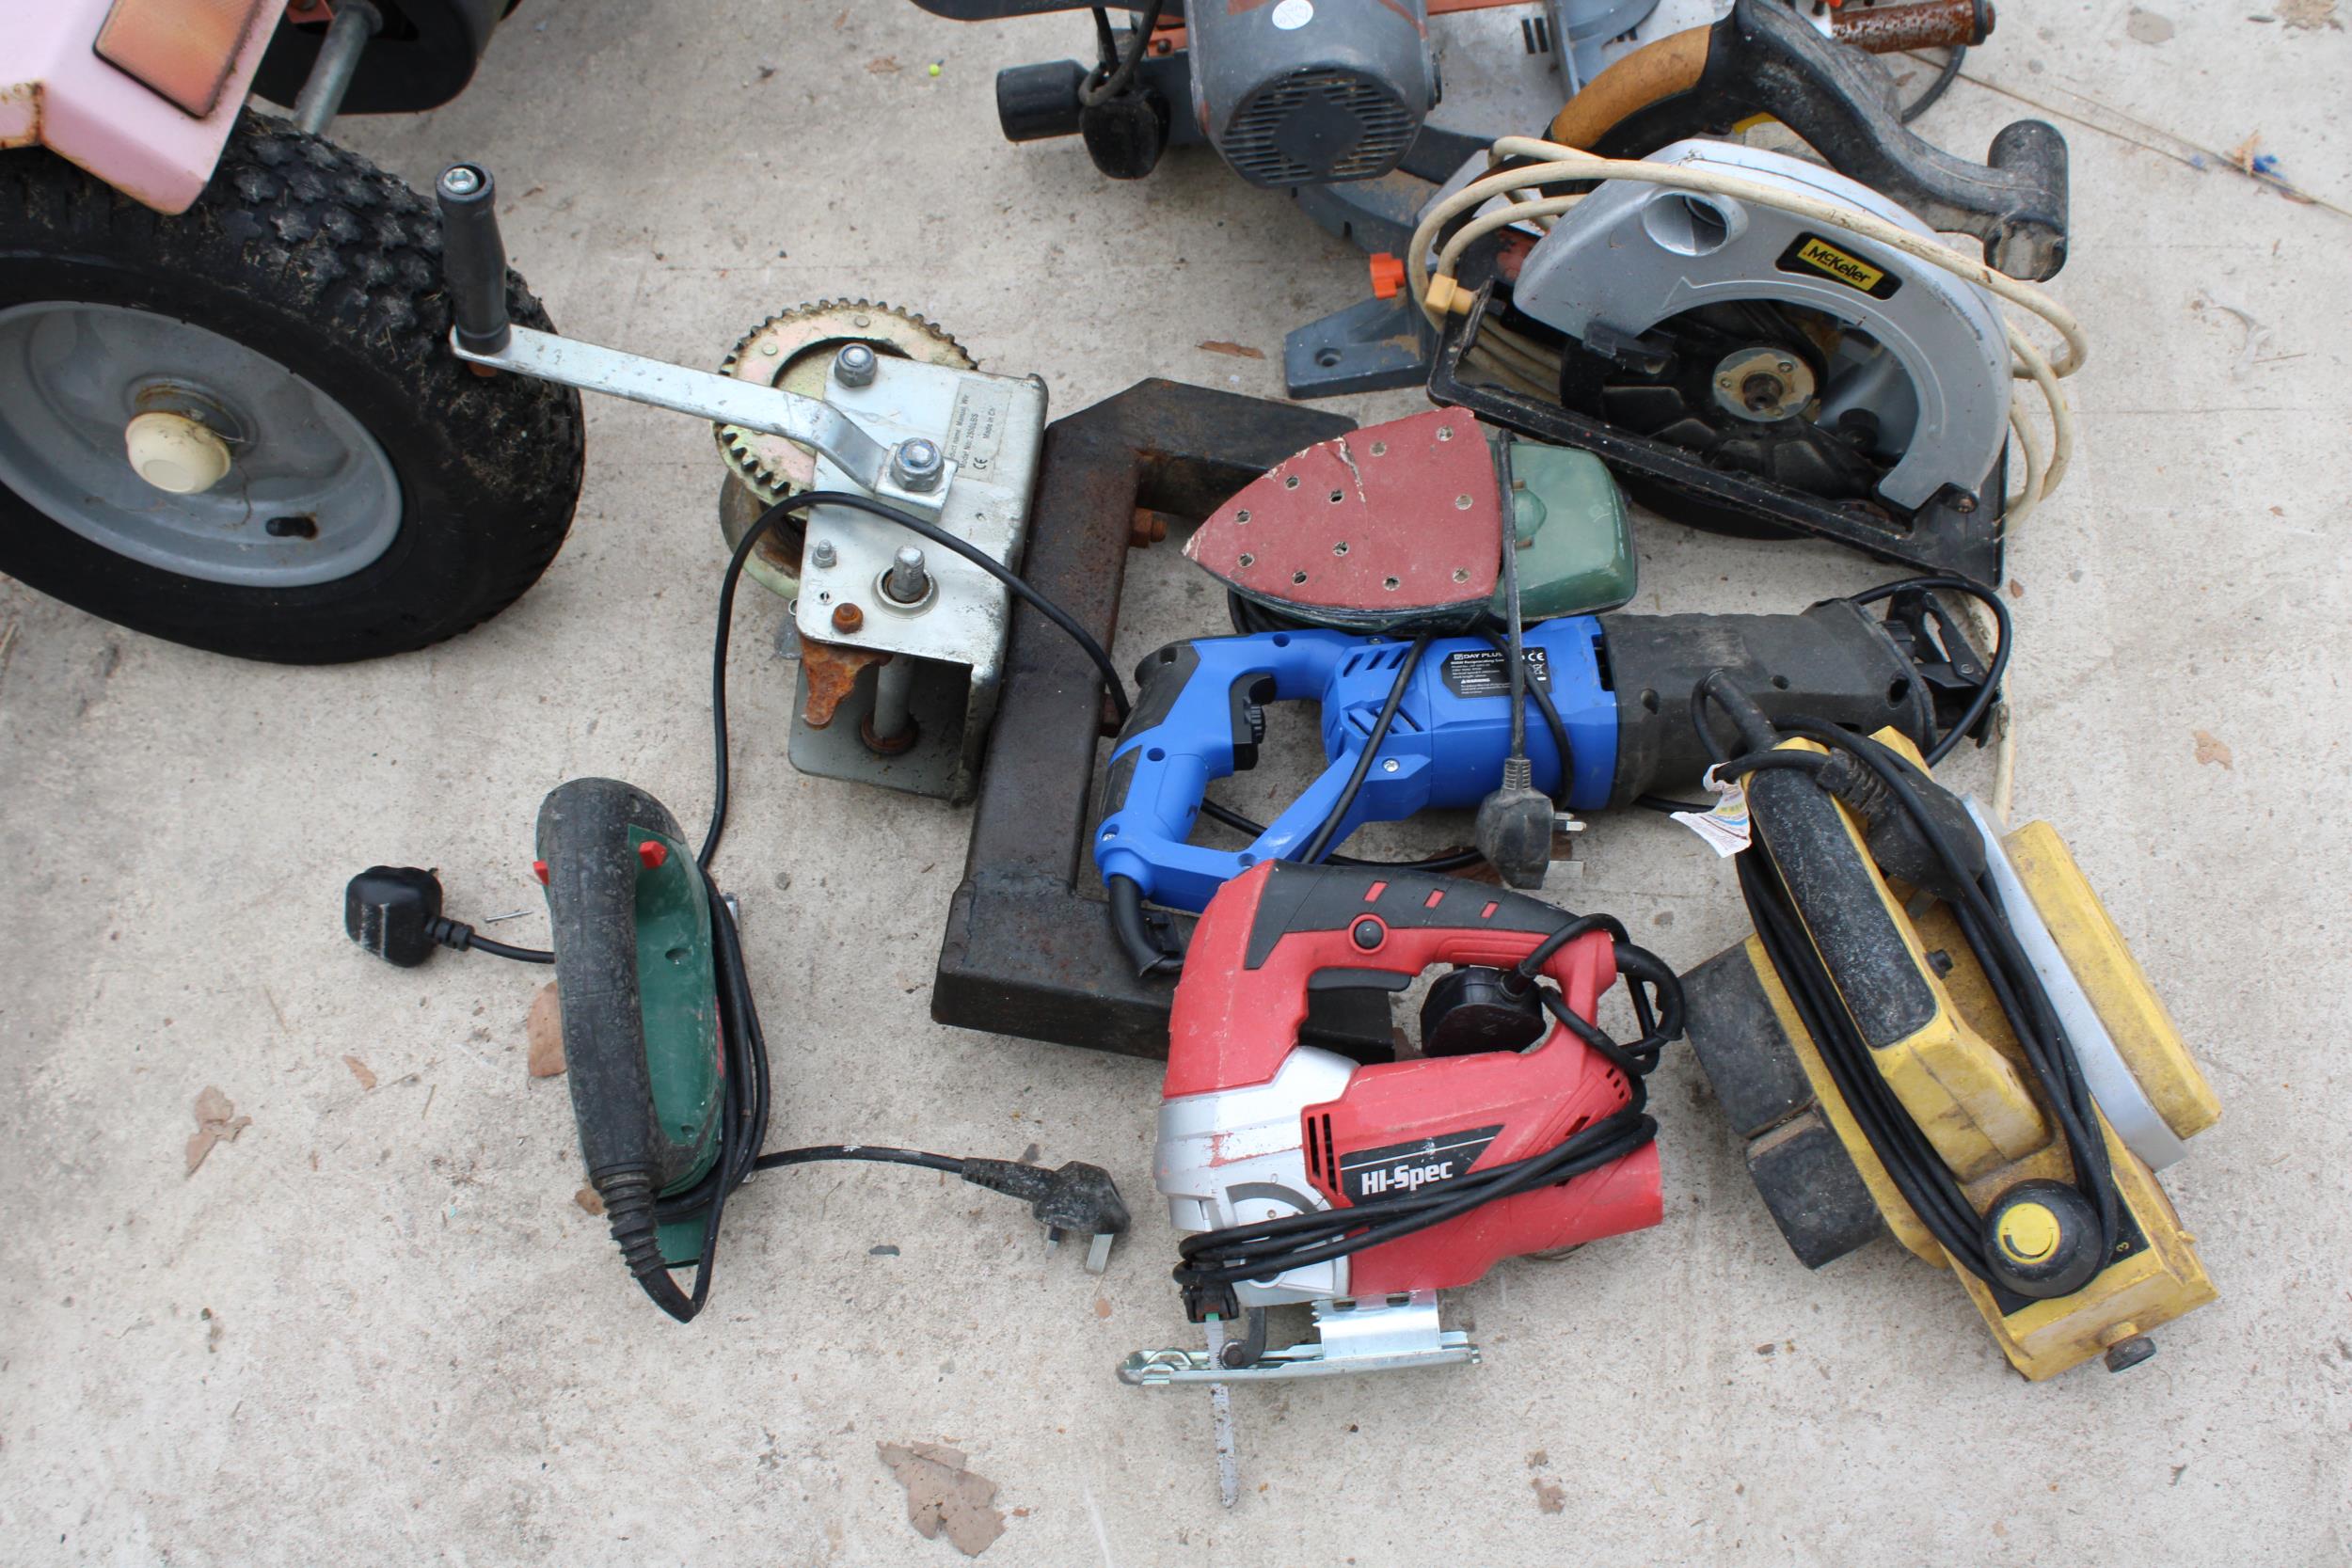 AN ASSORTMENT OF POWER TOOLS TO INCLUDE A CHALLENGE CHOP SAW, A MCKELLER WOOD PLANE AND A HI-SPEC - Image 3 of 4